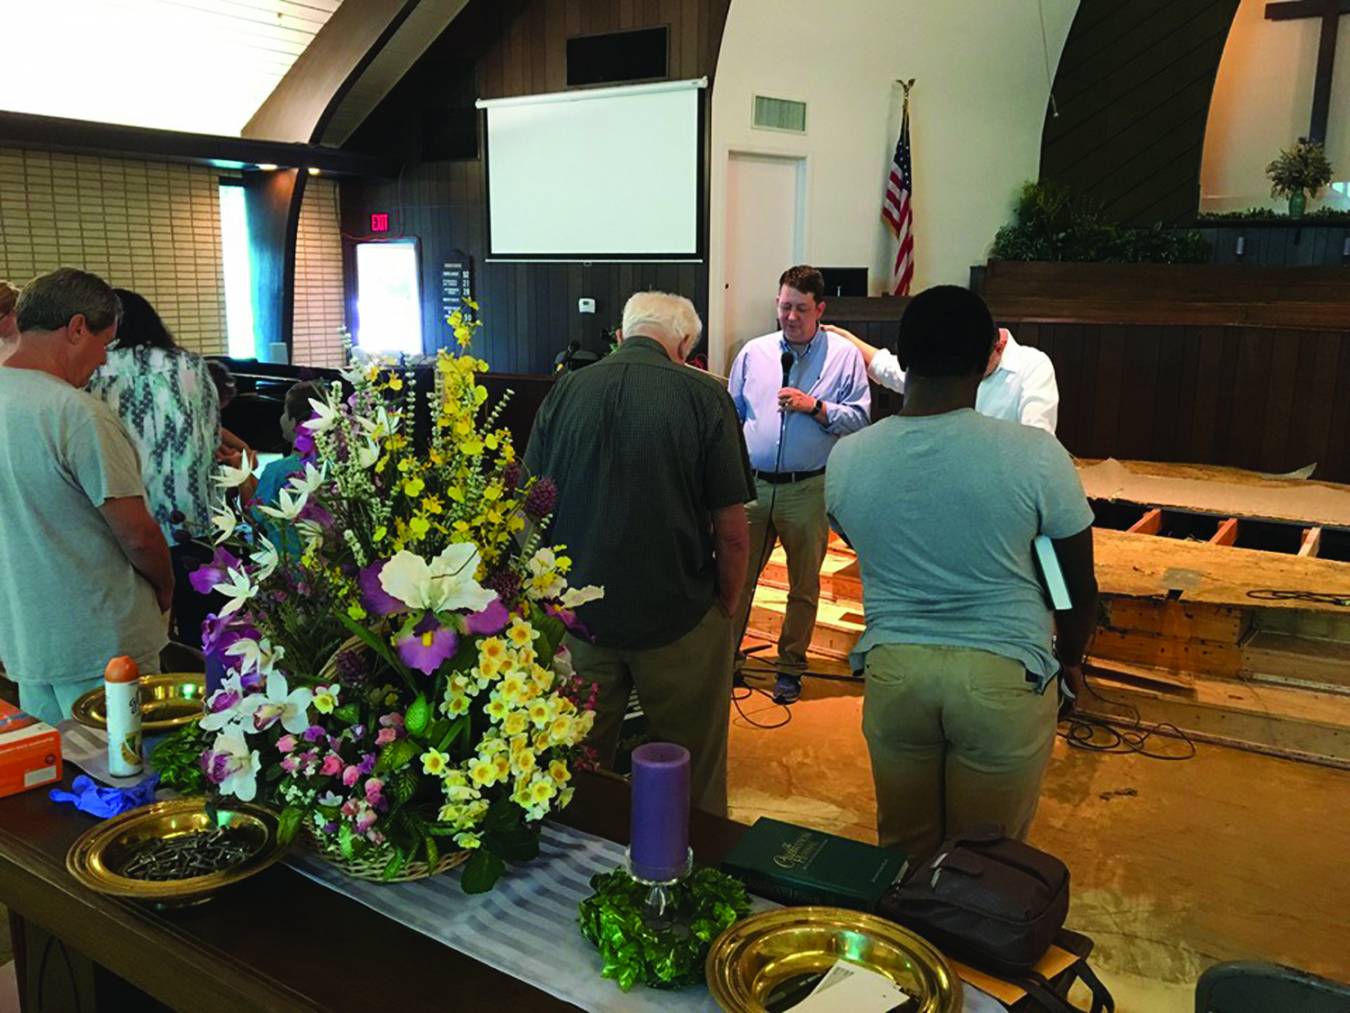 A small but dedicated crowd showed up Sunday morning to worship at Stevendale Baptist Church in Baton Rouge.